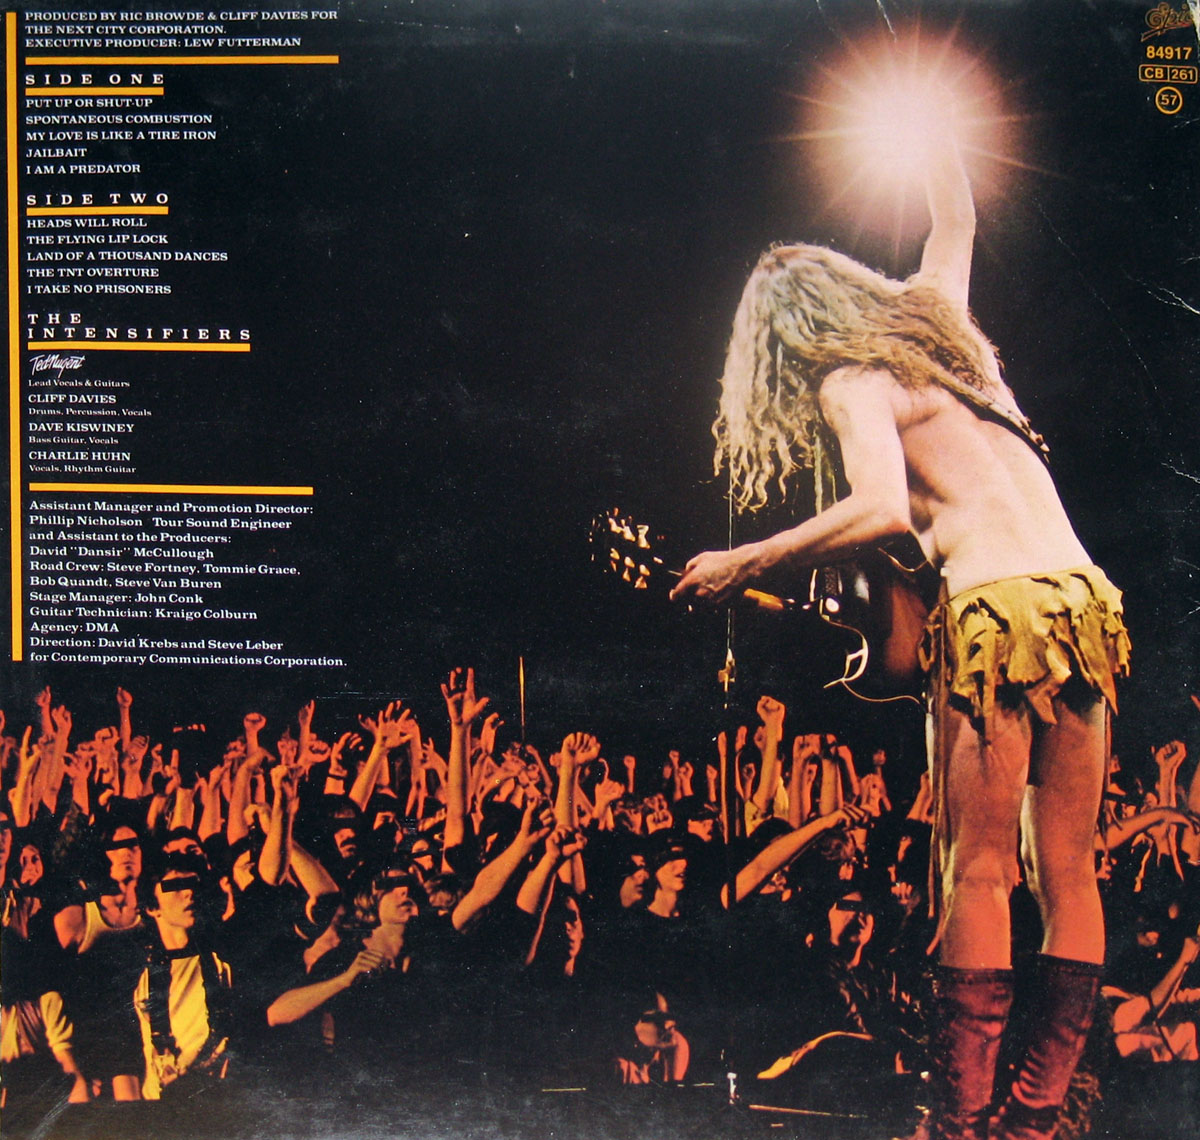 Back cover of the album Intensities in 10 Cities by Ted Nugent